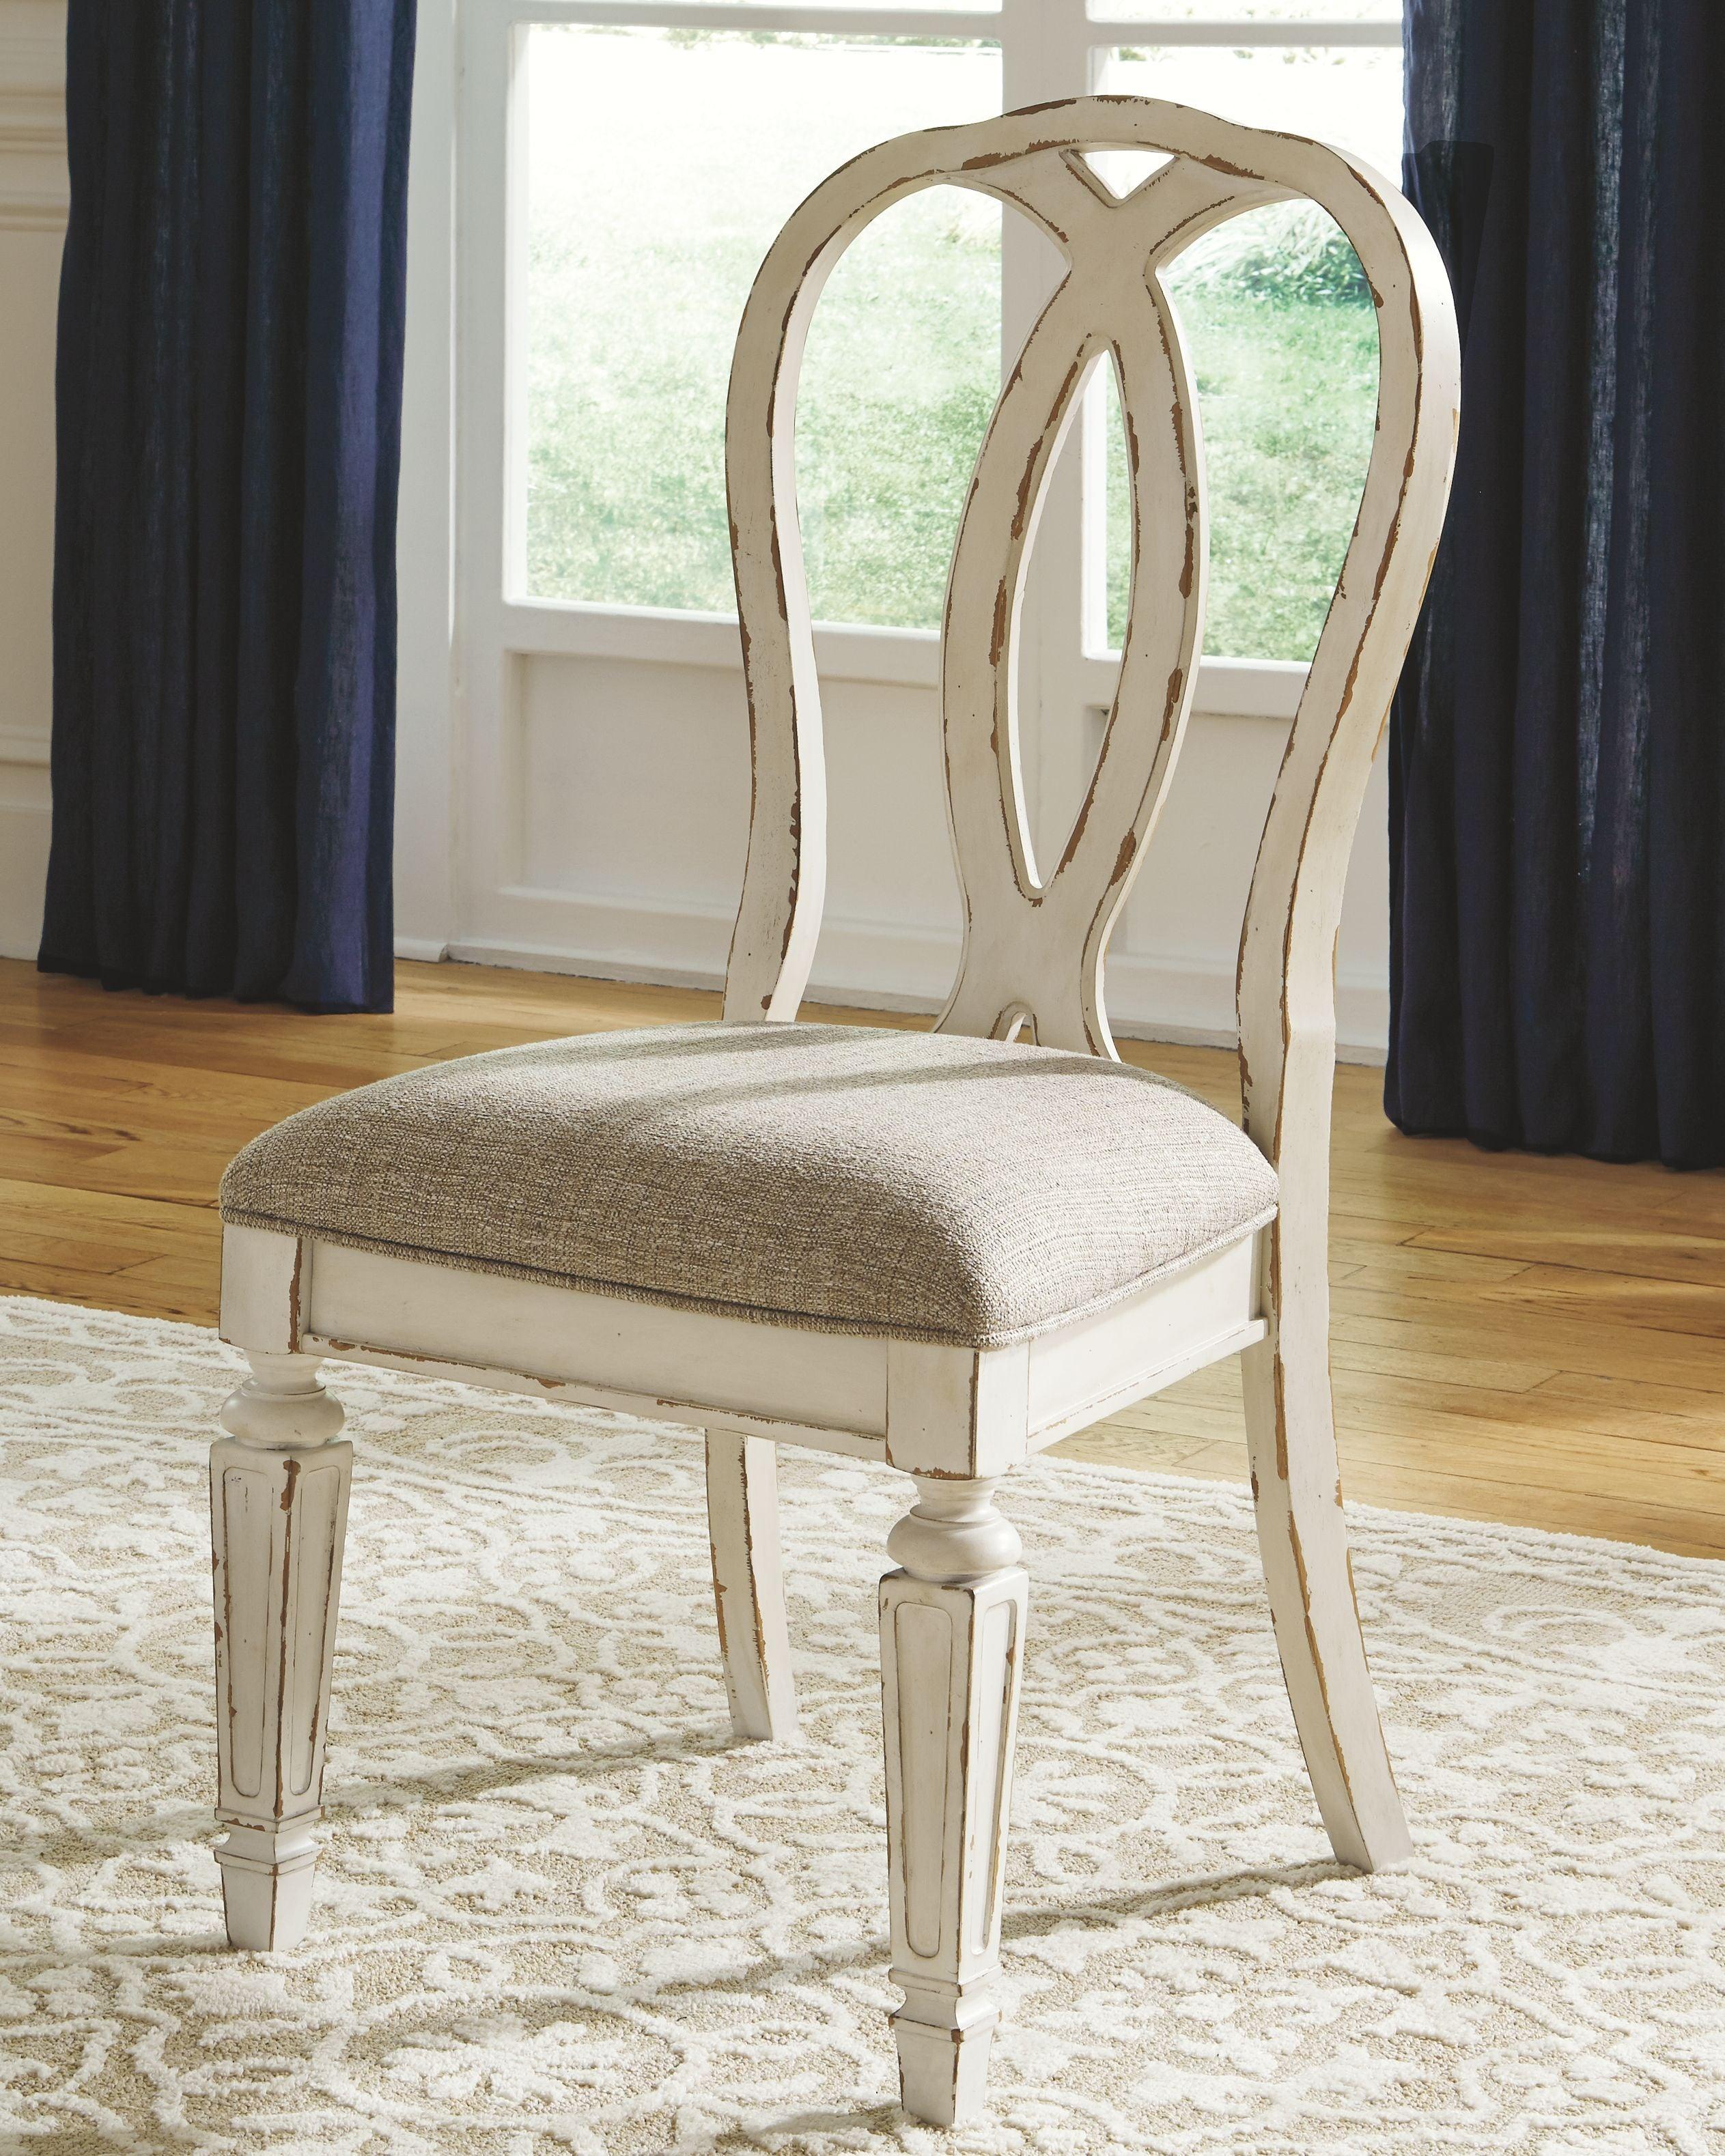 Ashley Furniture - Realyn - Chipped White - Dining Uph Side Chair (Set of 2) - Ribbonback - 5th Avenue Furniture